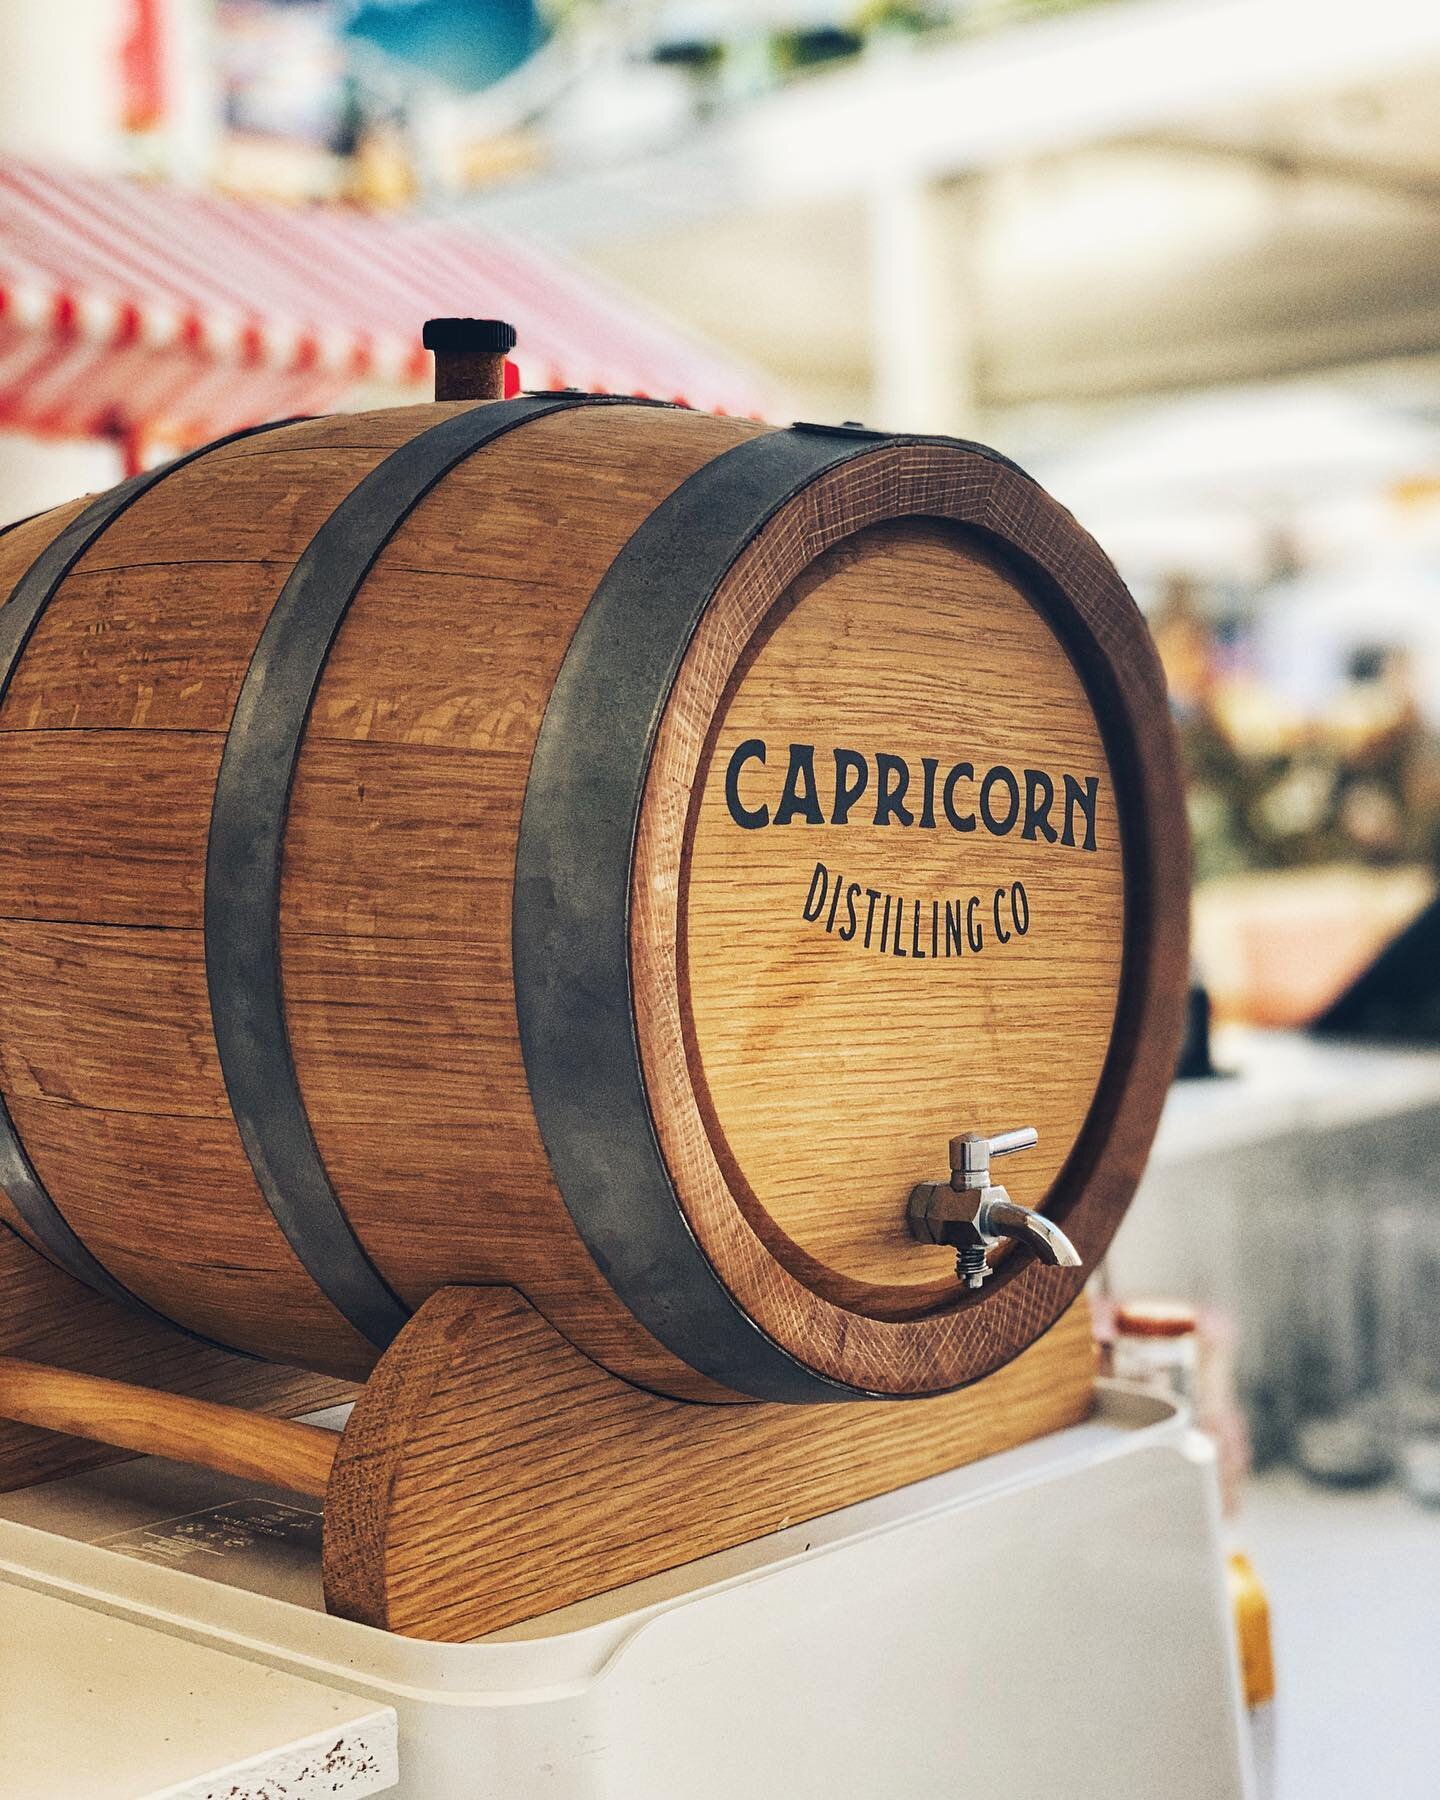 Like negroni&rsquo;s? How about this barrel aged Kingston Negroni! Thanks @capricorn_distilling with this delicious beauty
.
.
.
.
.
#goldcoast #destinationgoldcoast #cocktails #bluesonbroadbeach #bluesmusic #marilyns #marilynsgc #marilynsbar #marily